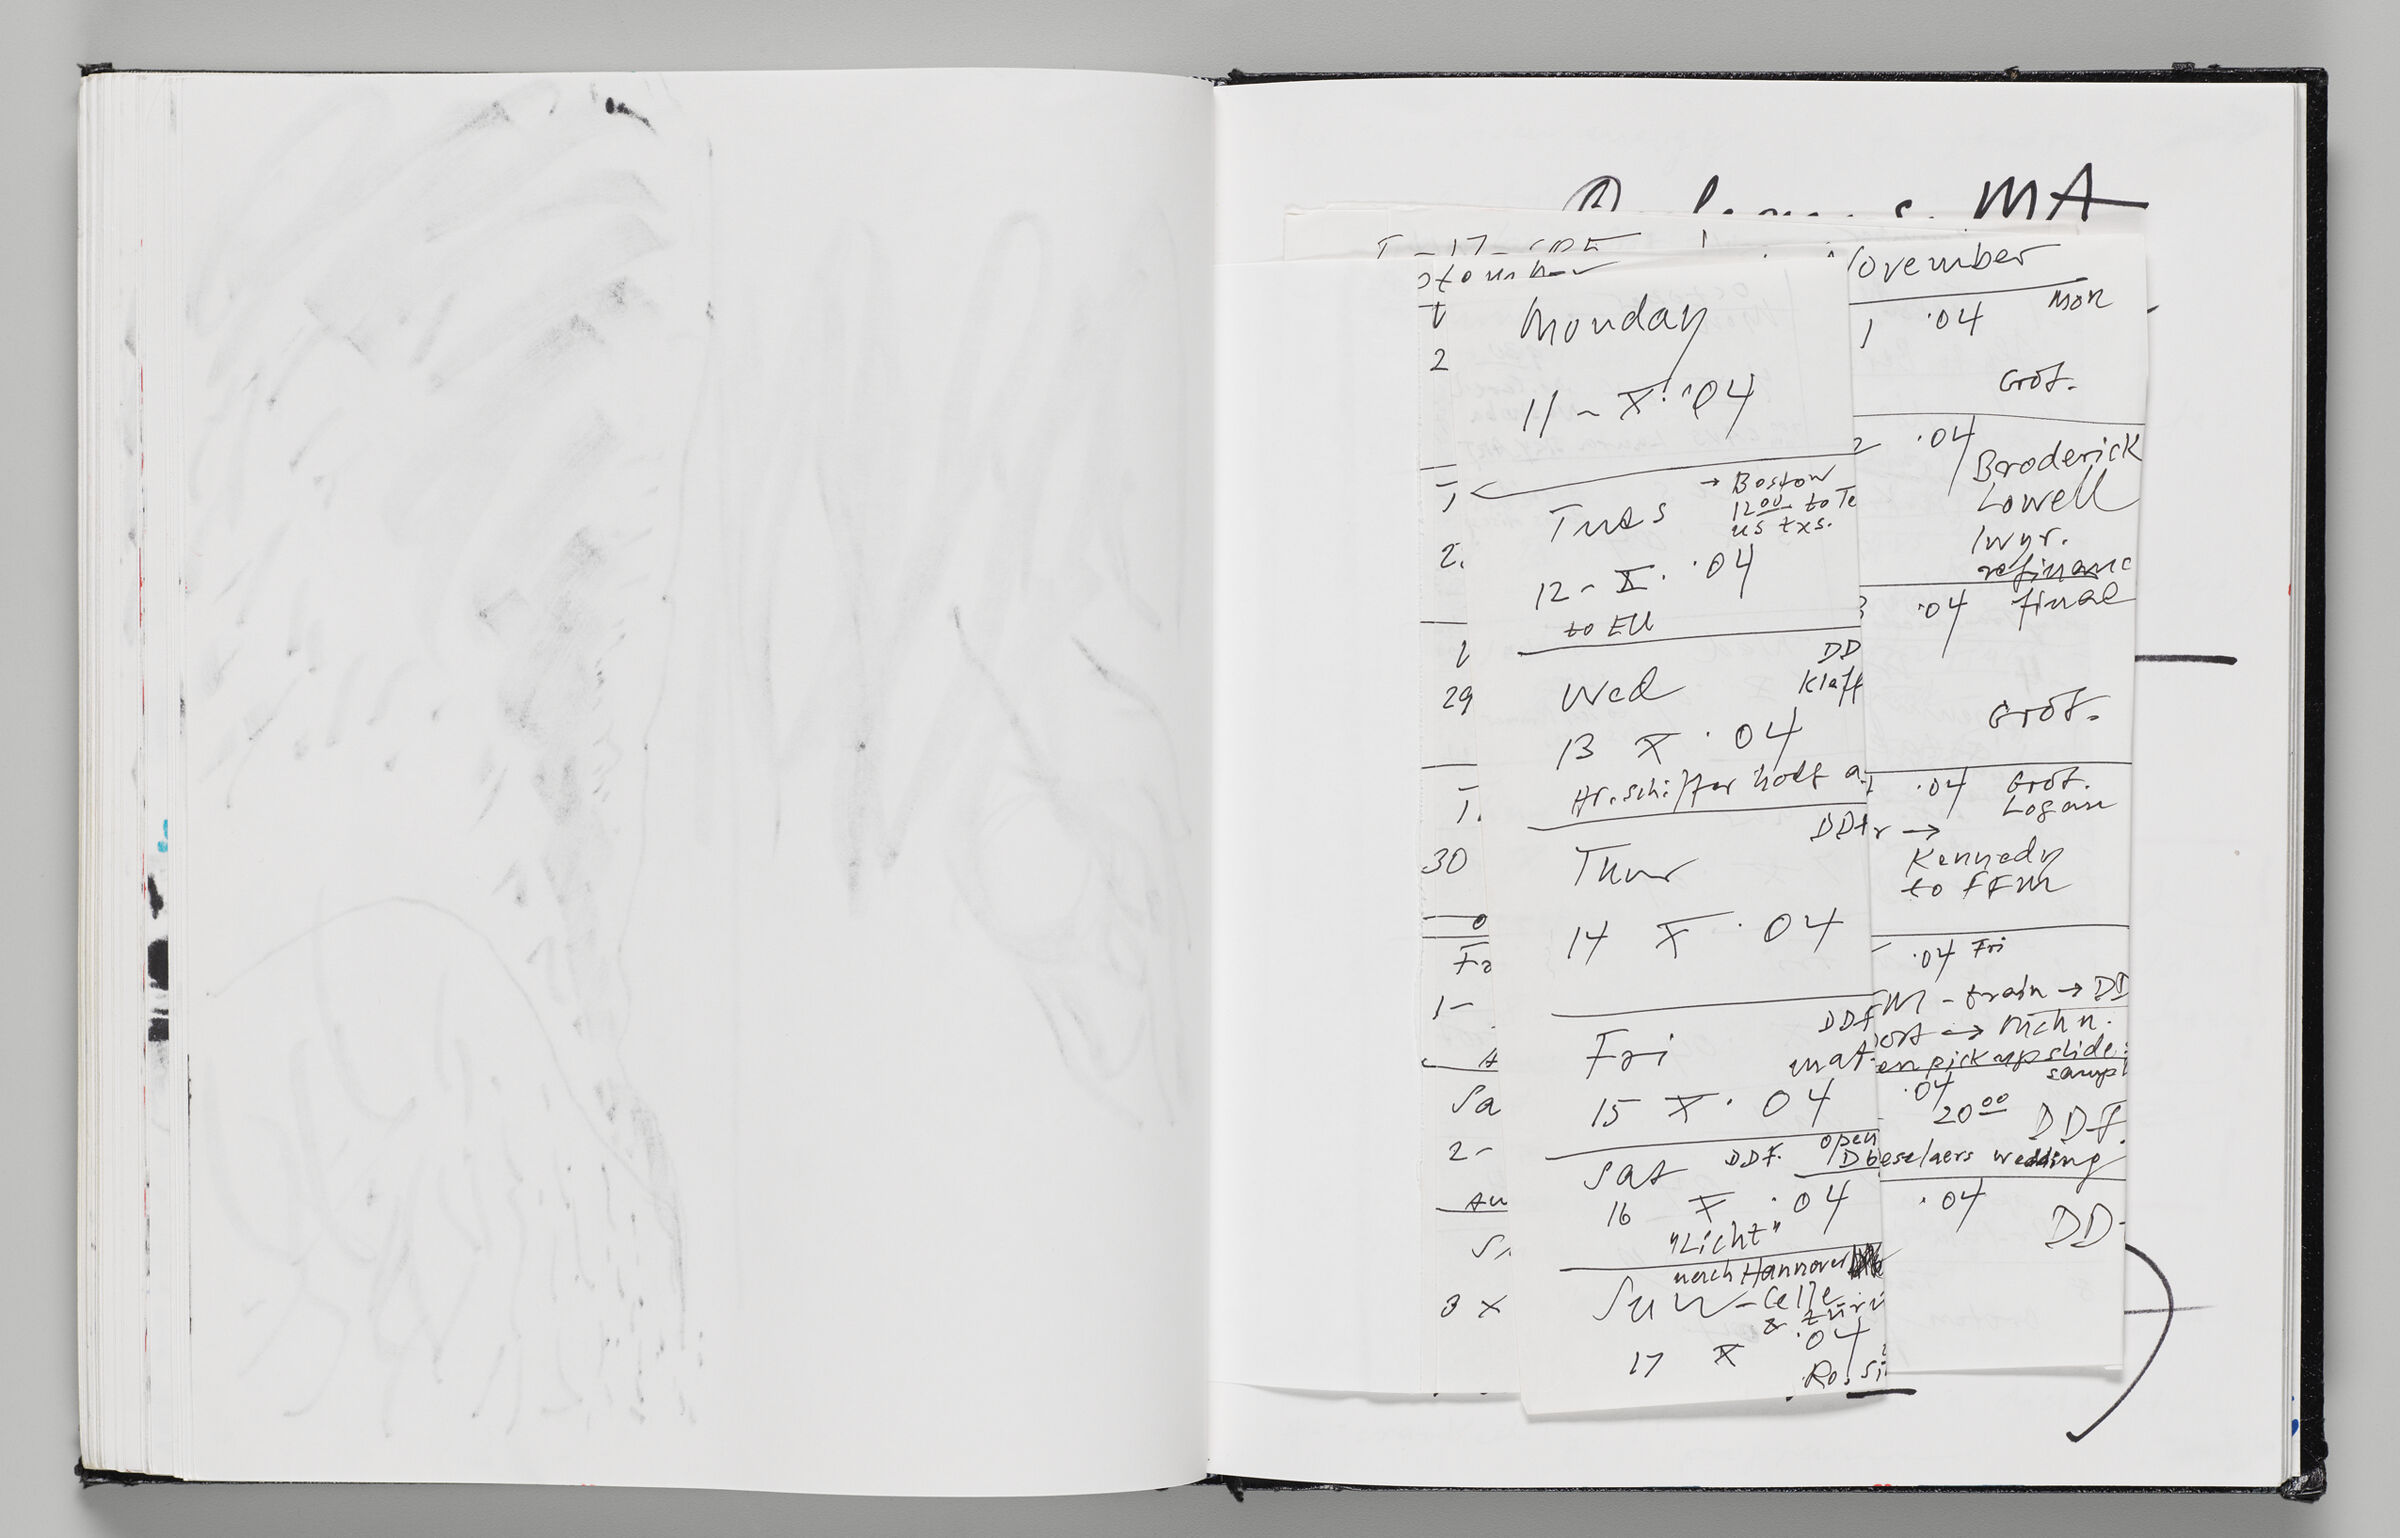 Untitled (Bleed-Through Of Previous Page, Left Page); Untitled (Adhered Calendar And Notes, Right Page)
